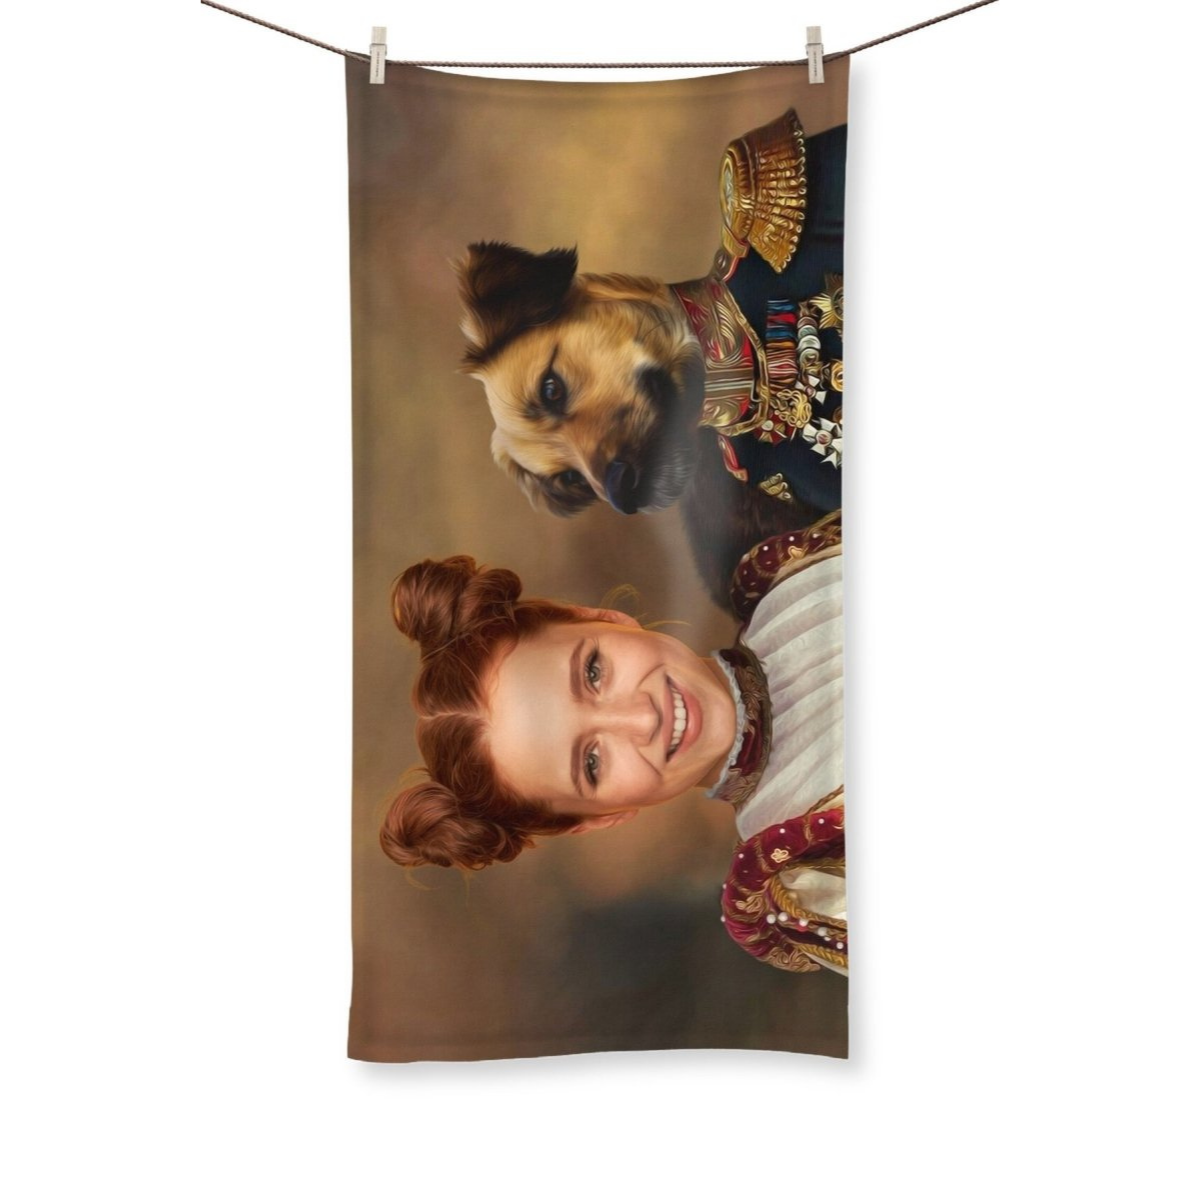 The Classy Pair: Custom Pet & Owner Towel  - Paw & Glory - #pet portraits# - #dog portraits# - #pet portraits uk#Paw & Glory, pawandglory, drawing pictures of pets, the admiral dog portrait, professional pet photos, dog canvas art, the admiral dog portrait, dog portraits colorful, pet portrait,pet portraits Towel